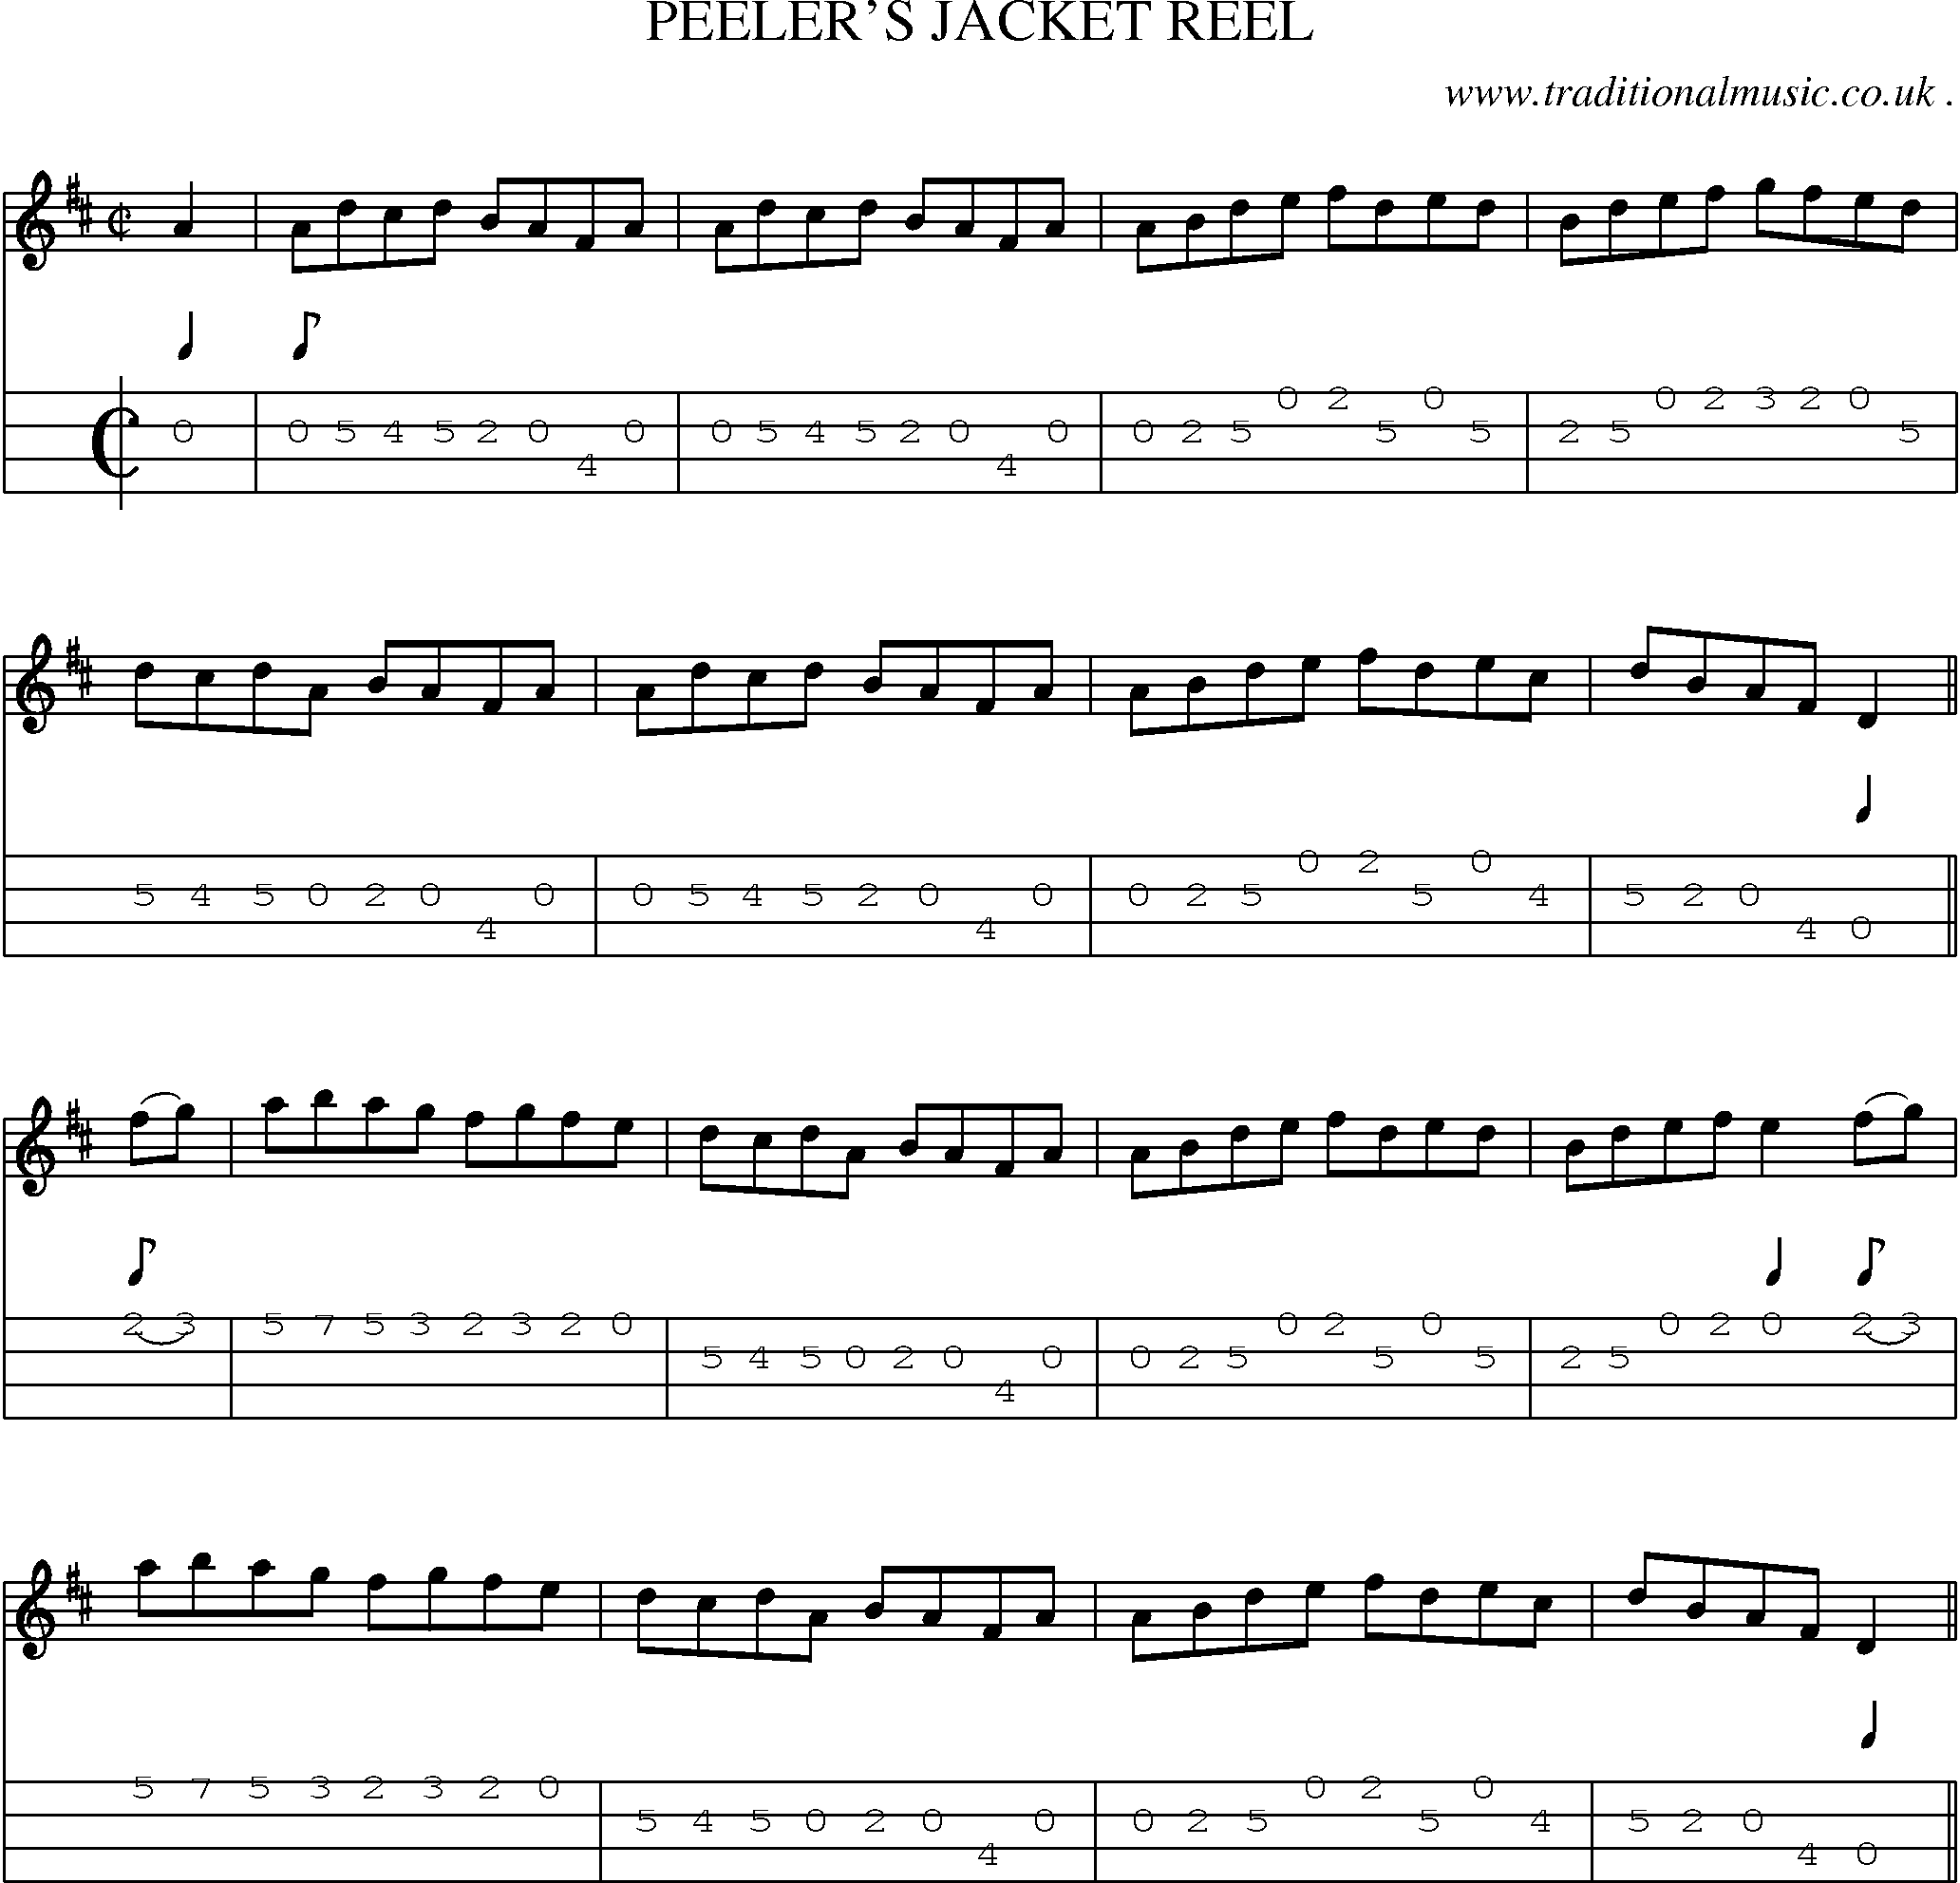 Sheet-Music and Mandolin Tabs for Peelers Jacket Reel